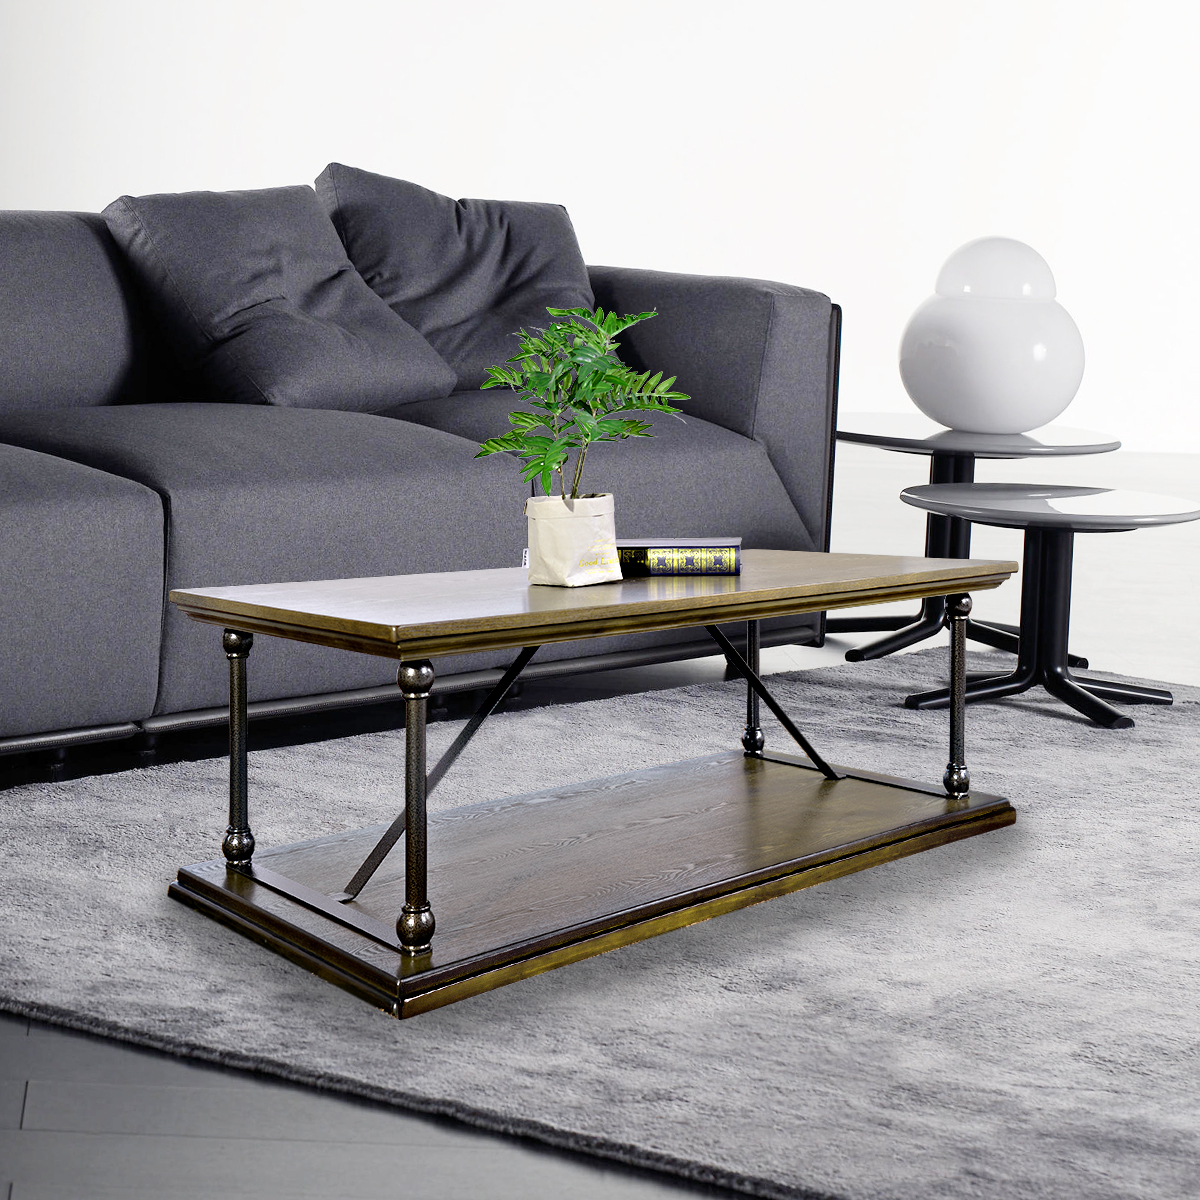 4 Legs Coffee Table with storage